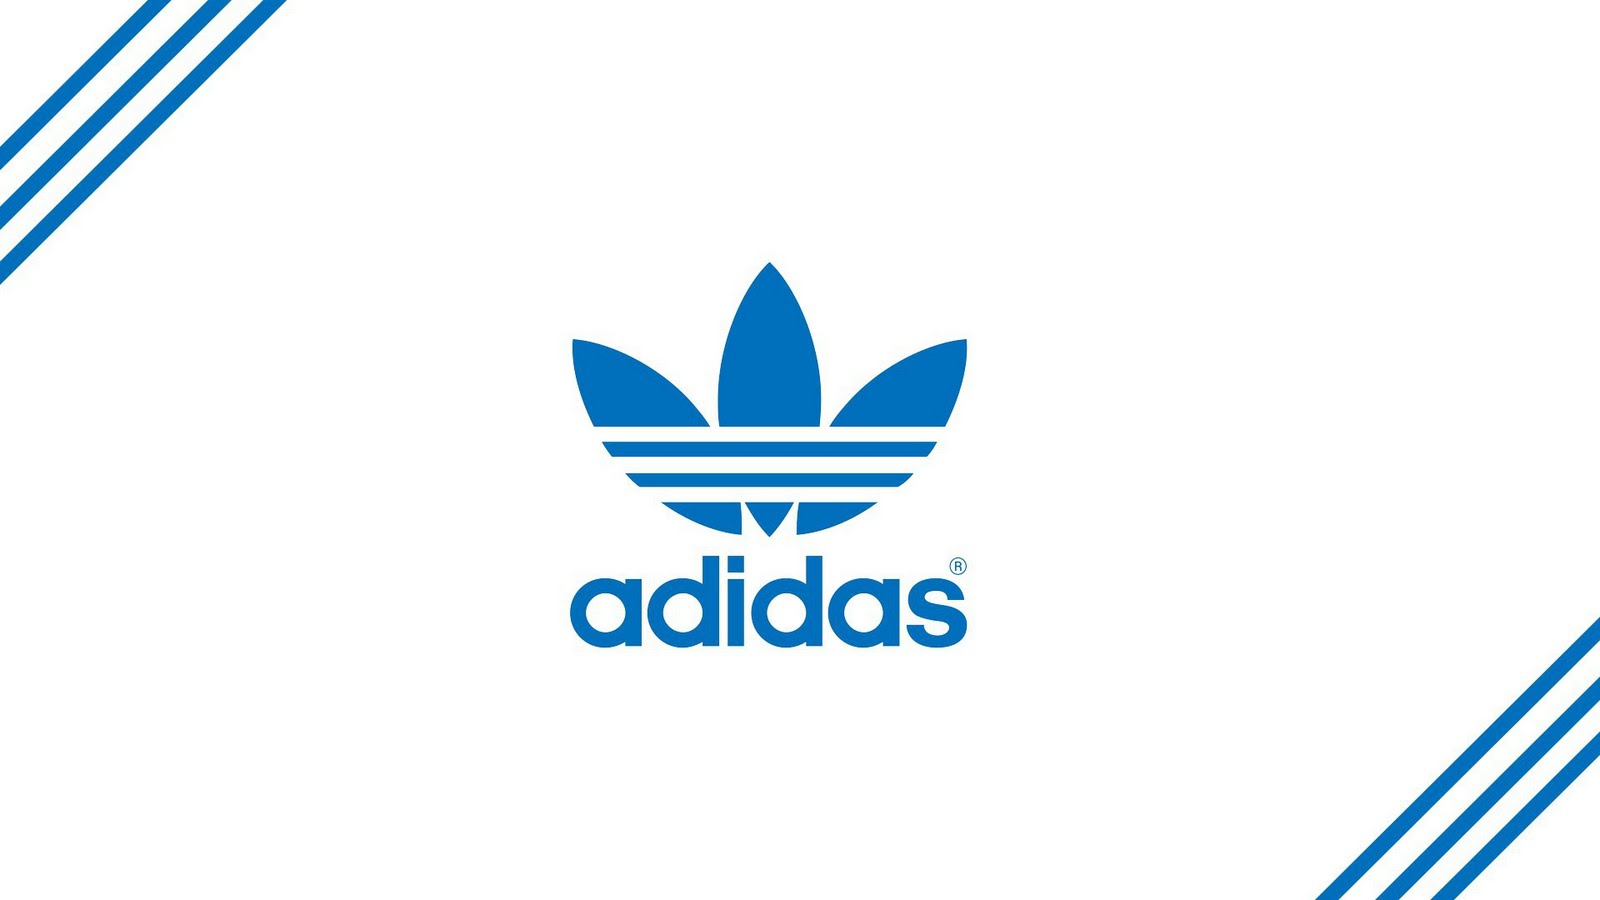 To Download Adidas Logo wallpaper click on full size and then right